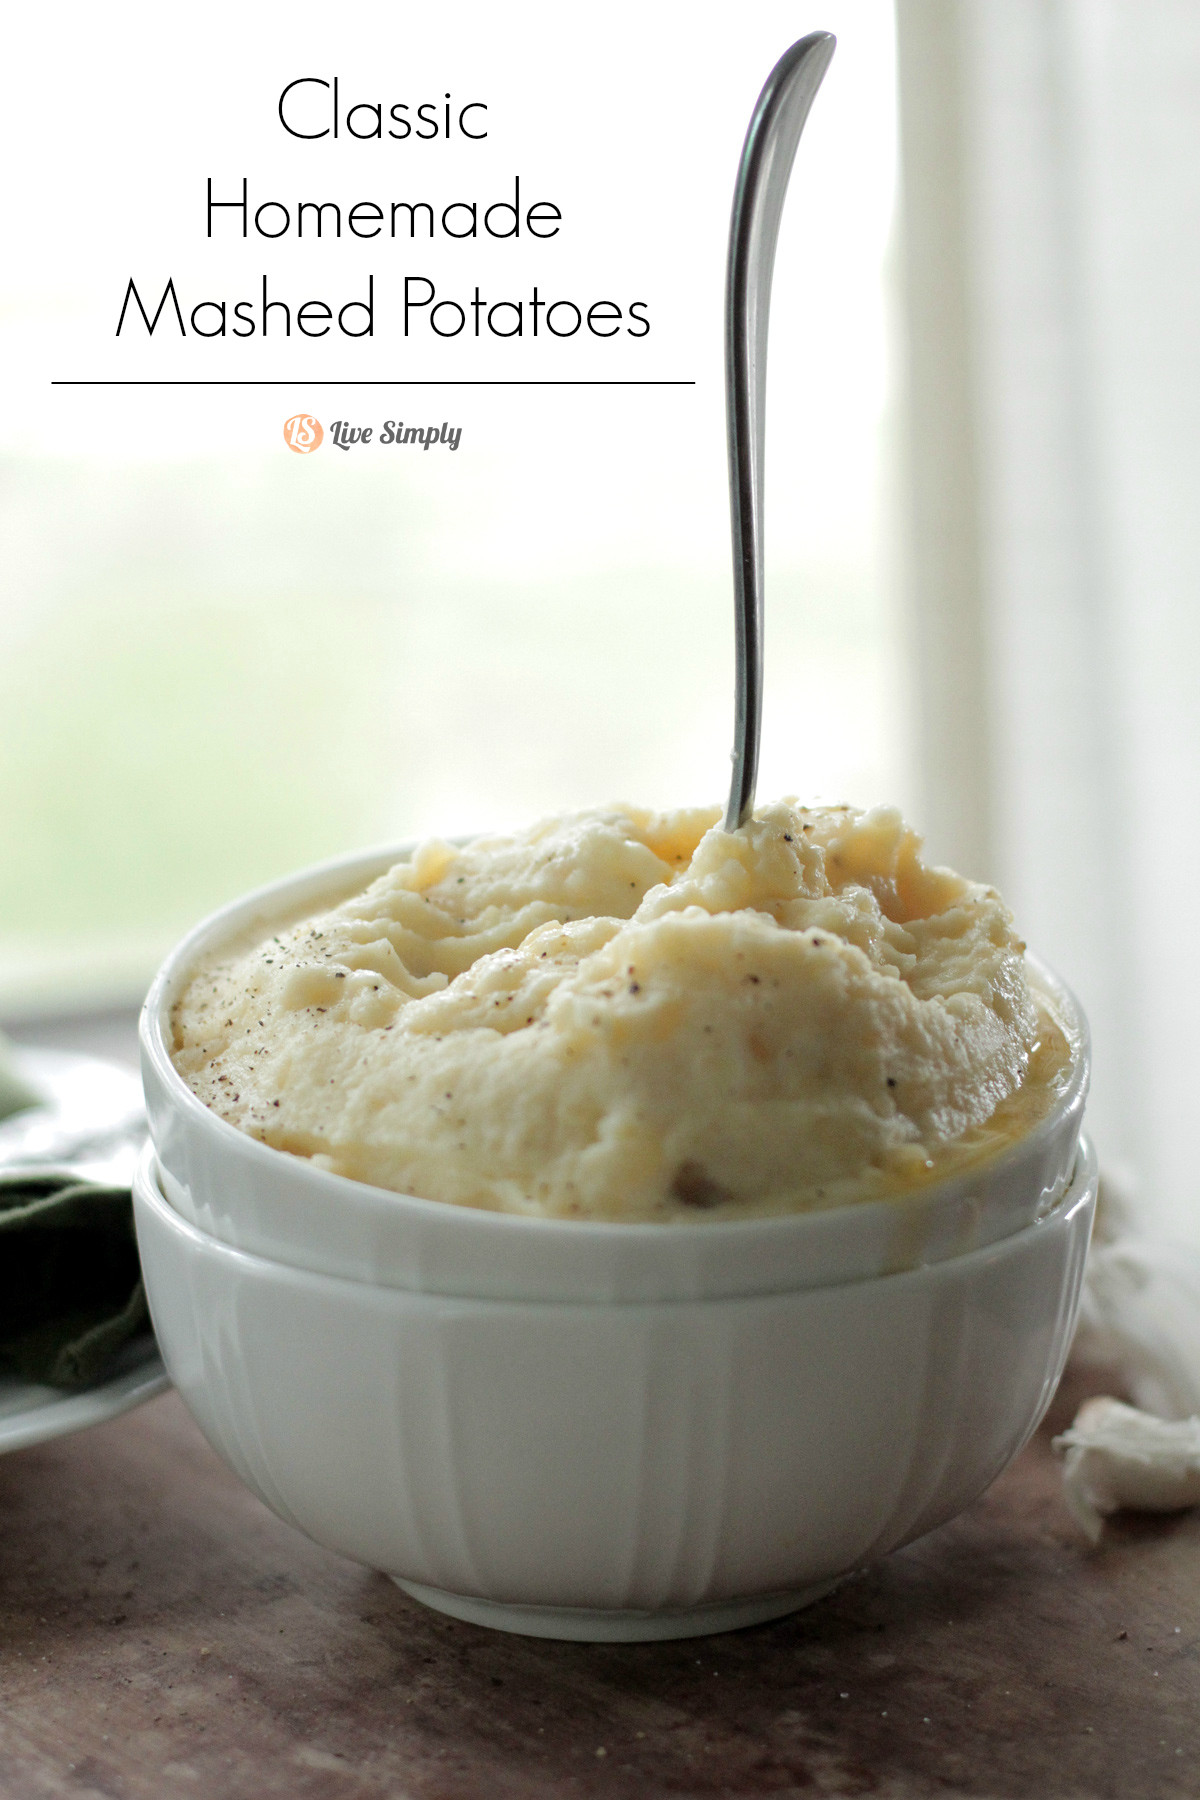 Best Homemade Mashed Potatoes
 Classic Mashed Potatoes Live Simply